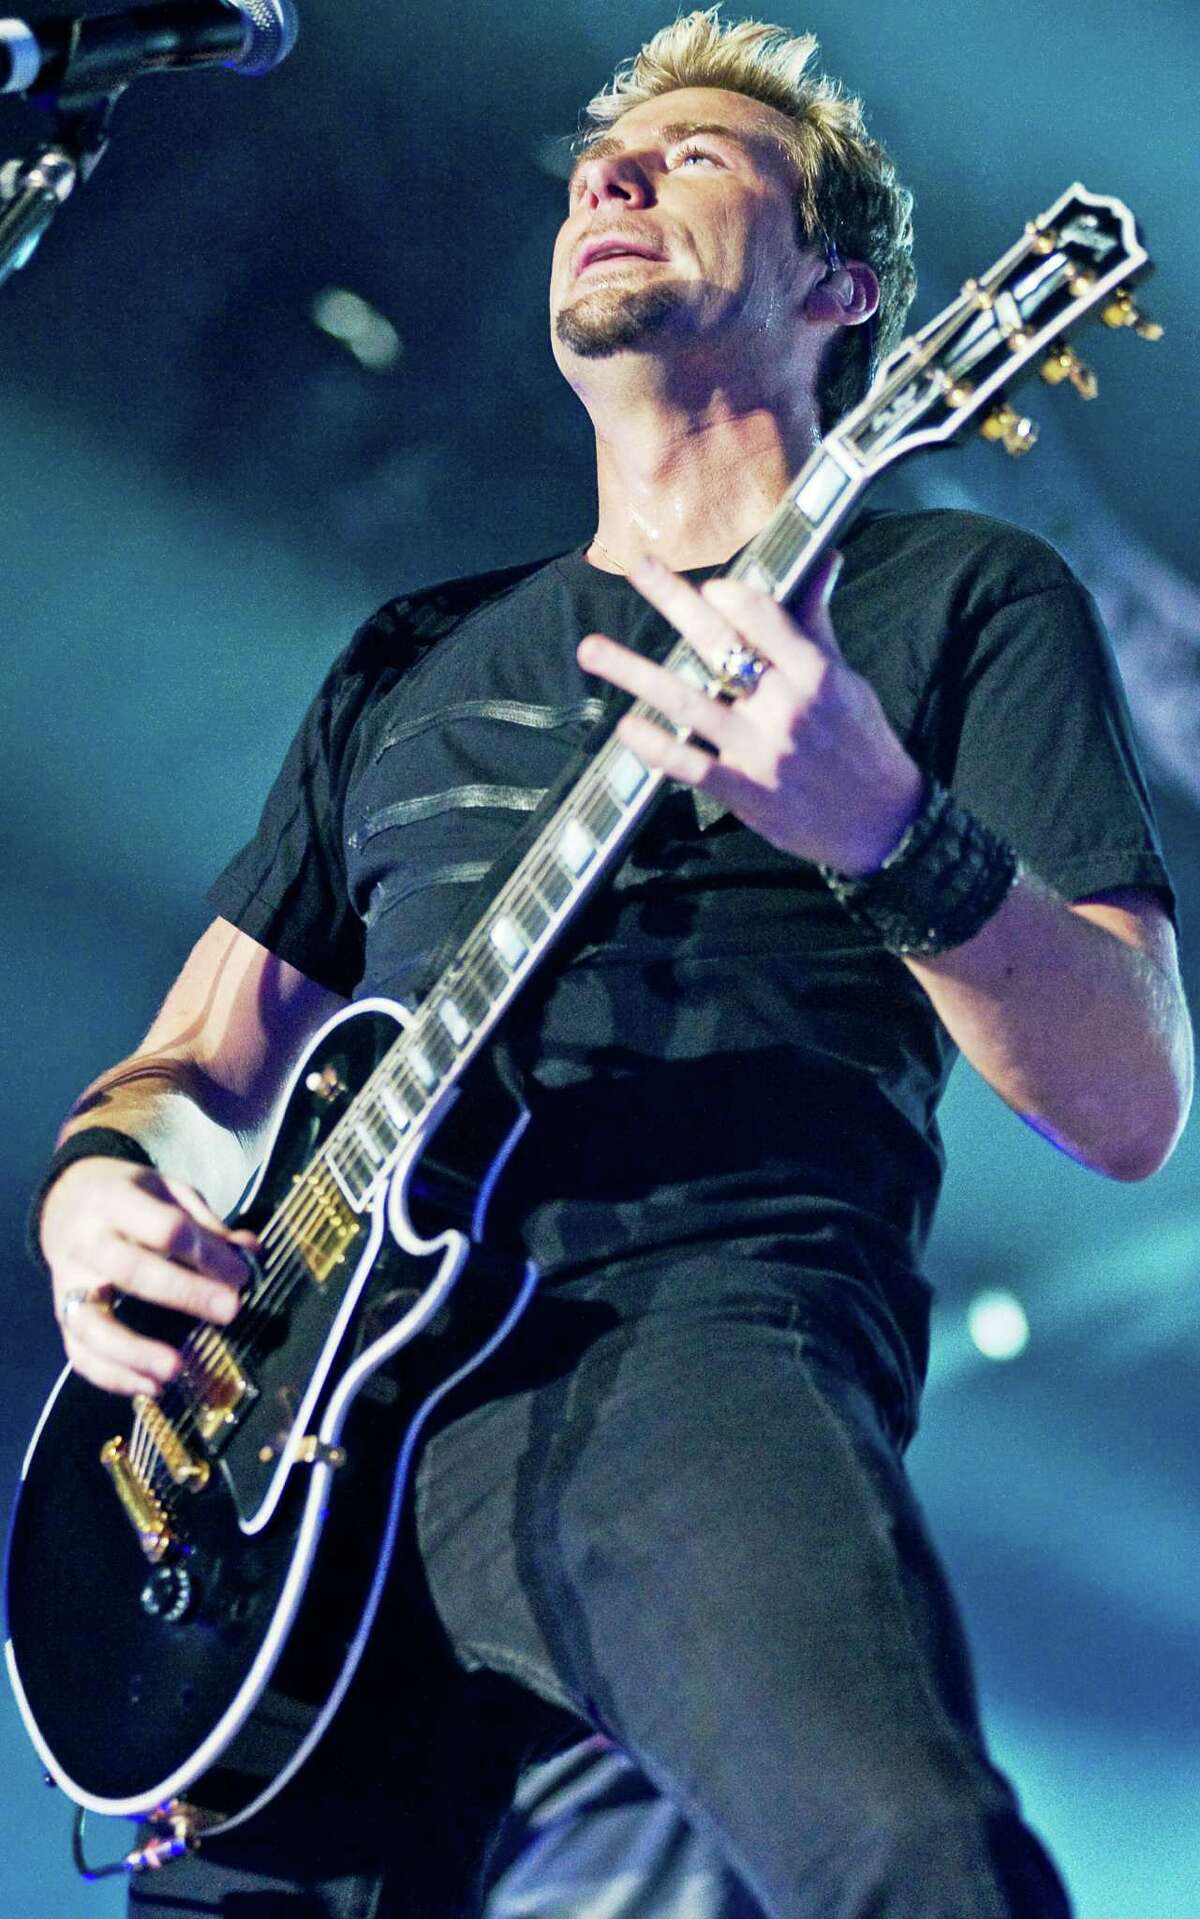 Chad Kroeger of Nickelback performs at the I Wireless Center on April 10, 2012 in Moline, Illinois.